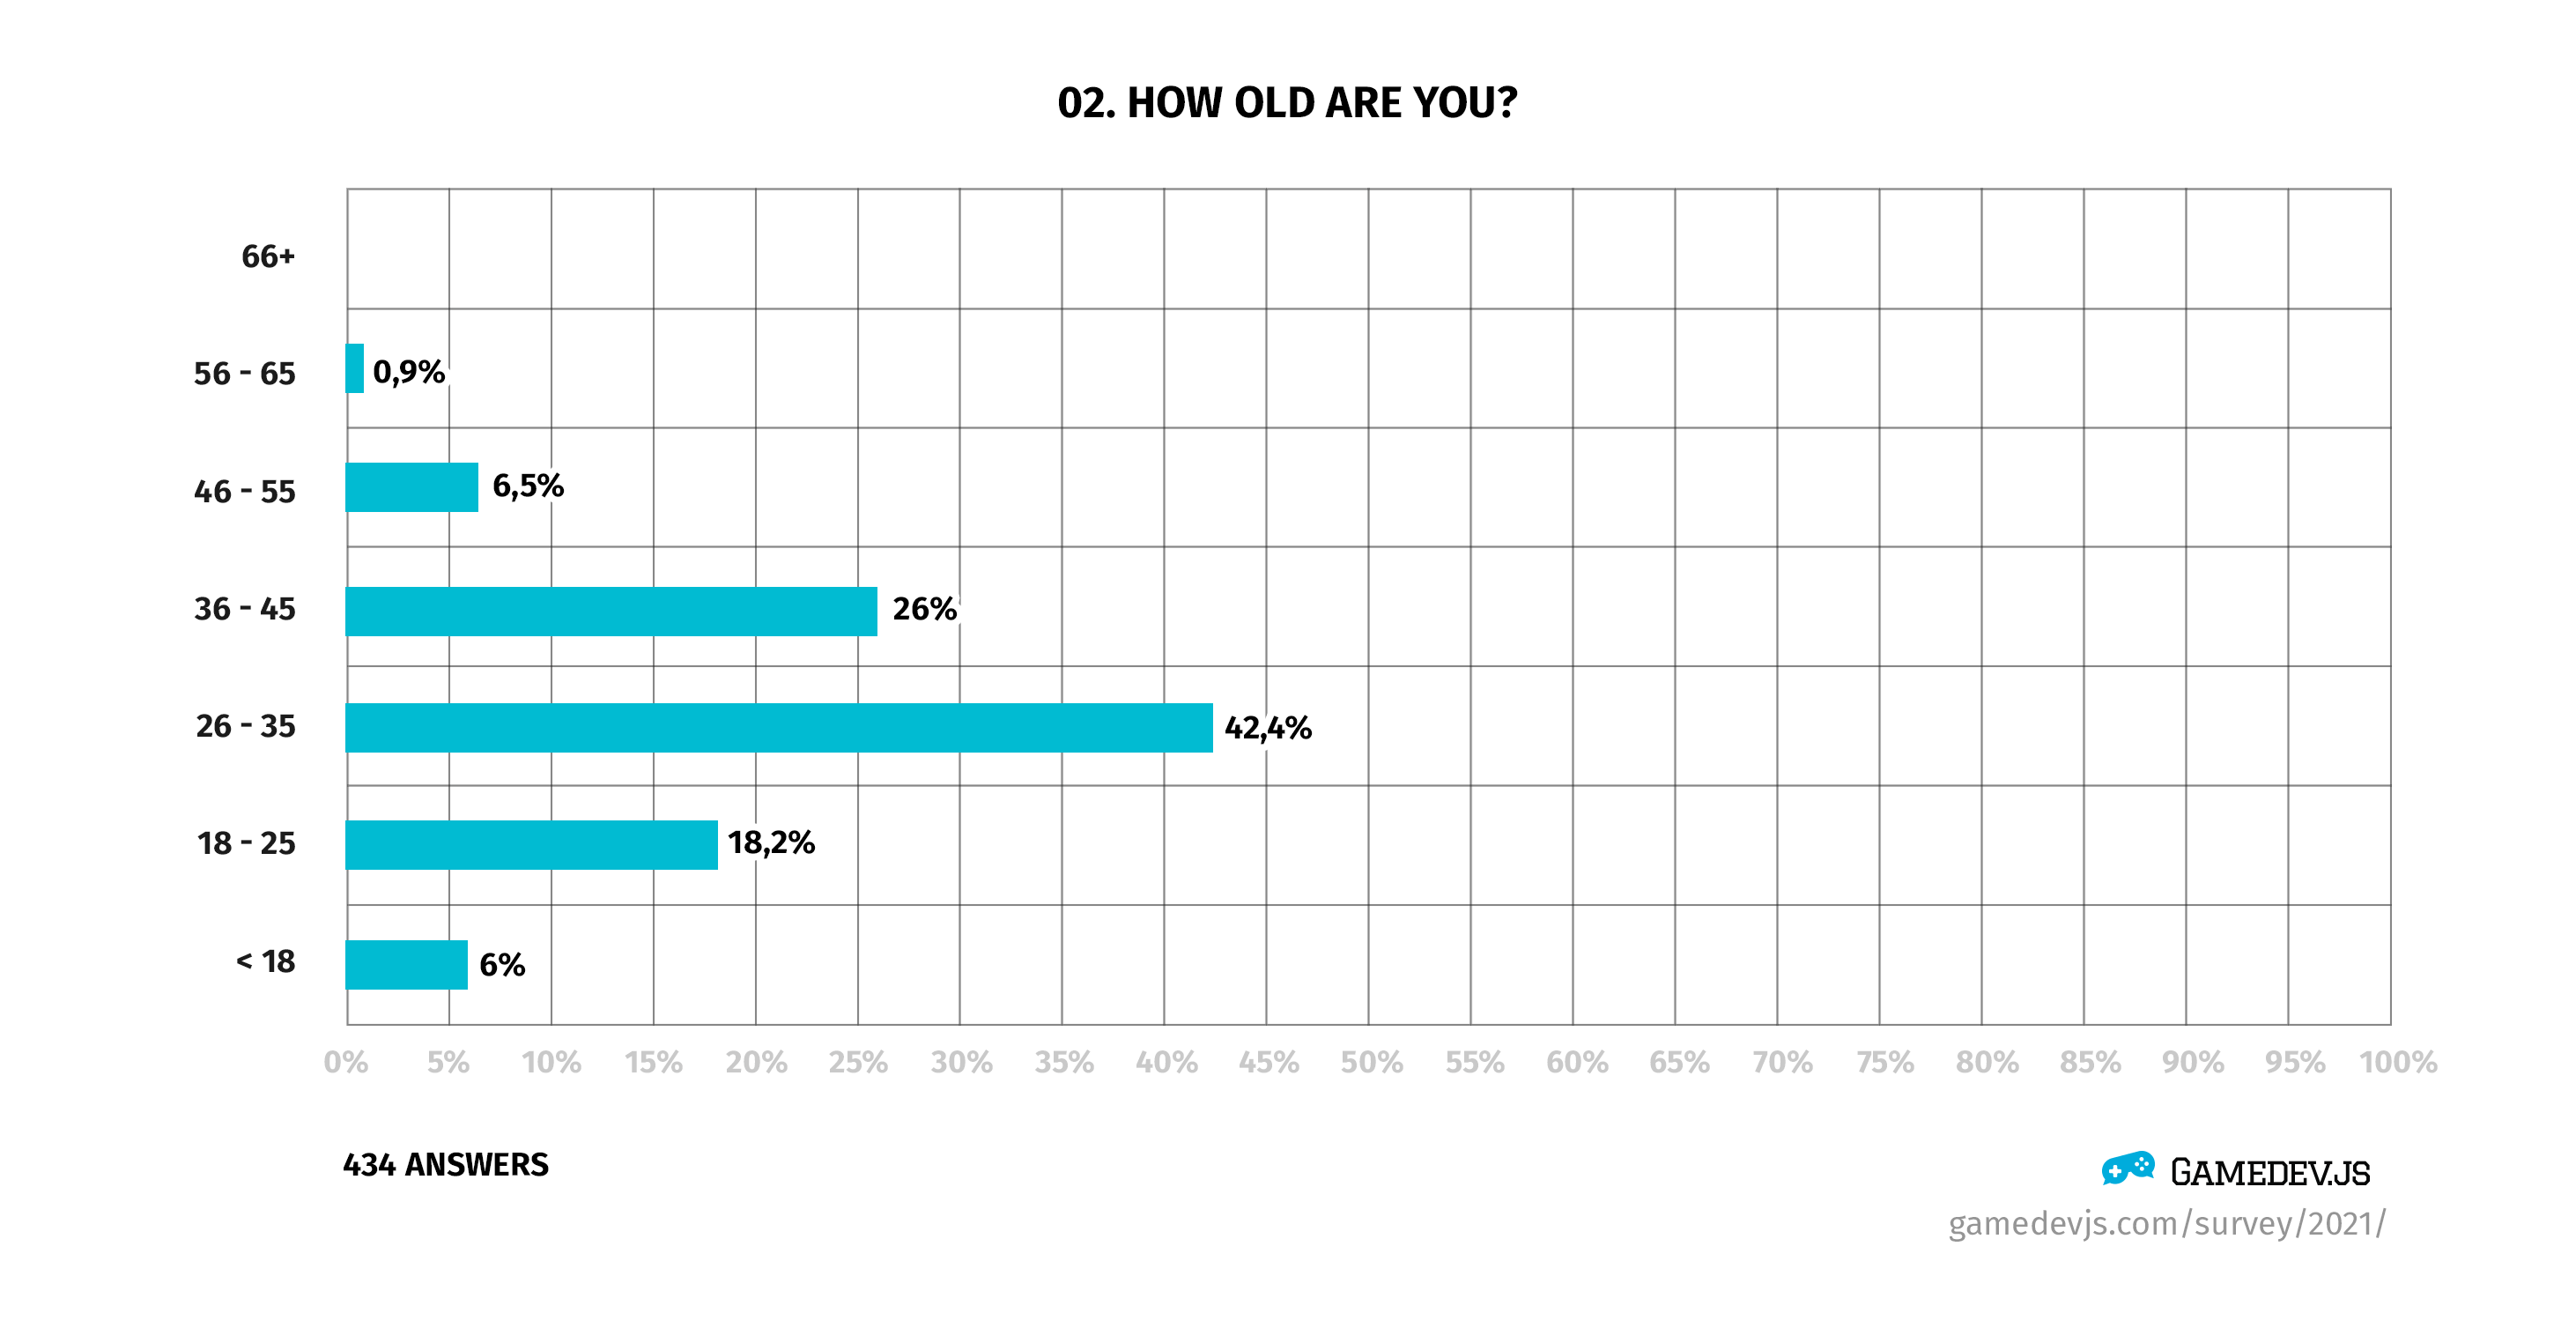 Gamedev.js Survey 2021 - Question #2: How old are you?